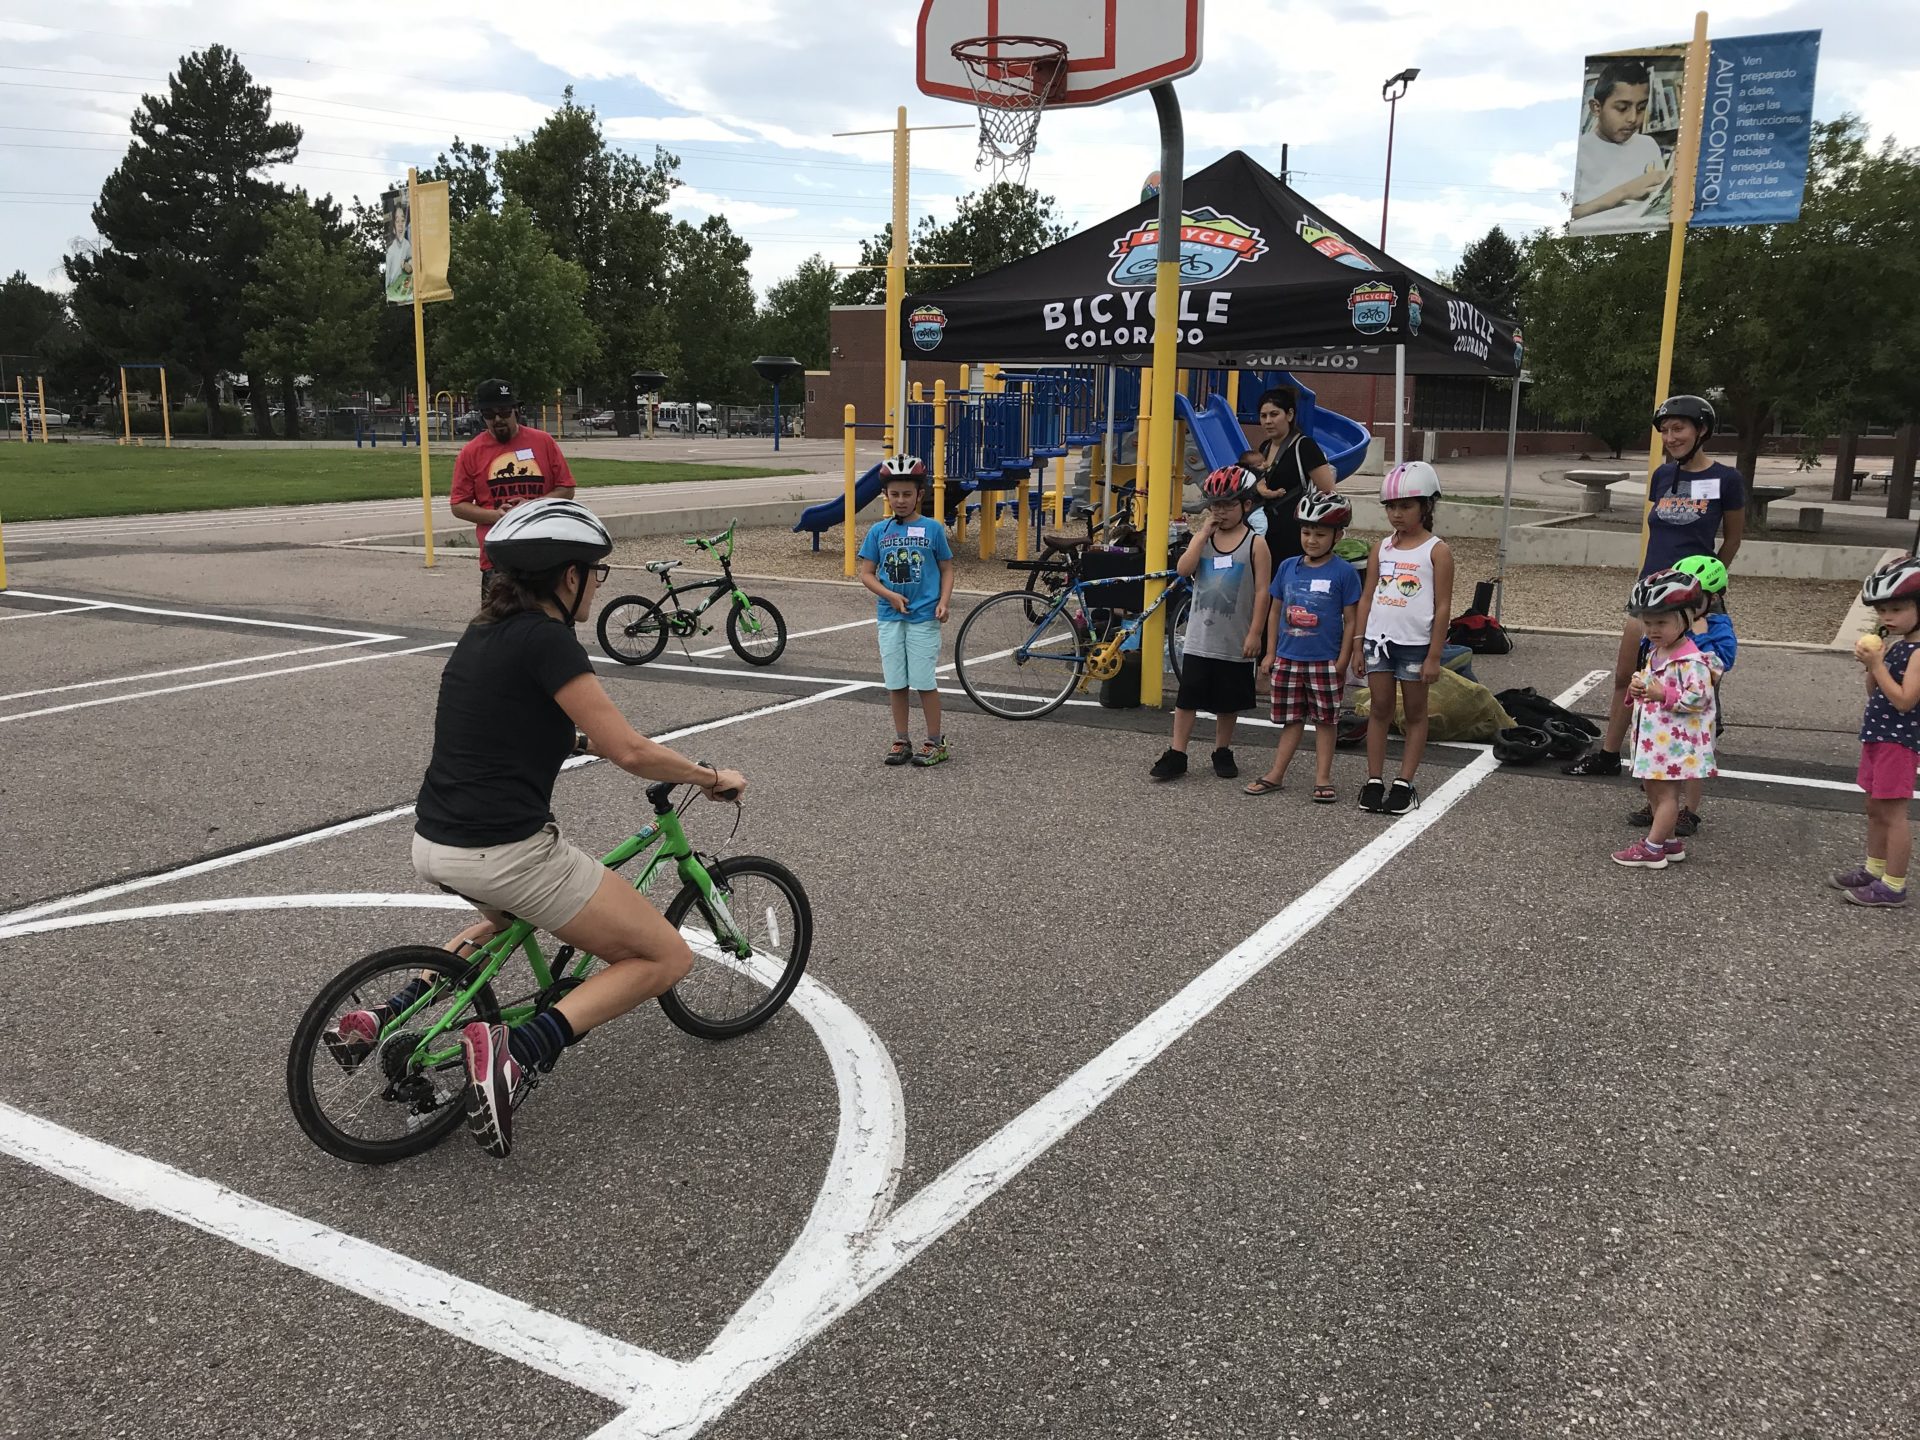 An adult demonstrating gliding on a bike to a group of children in a playground.